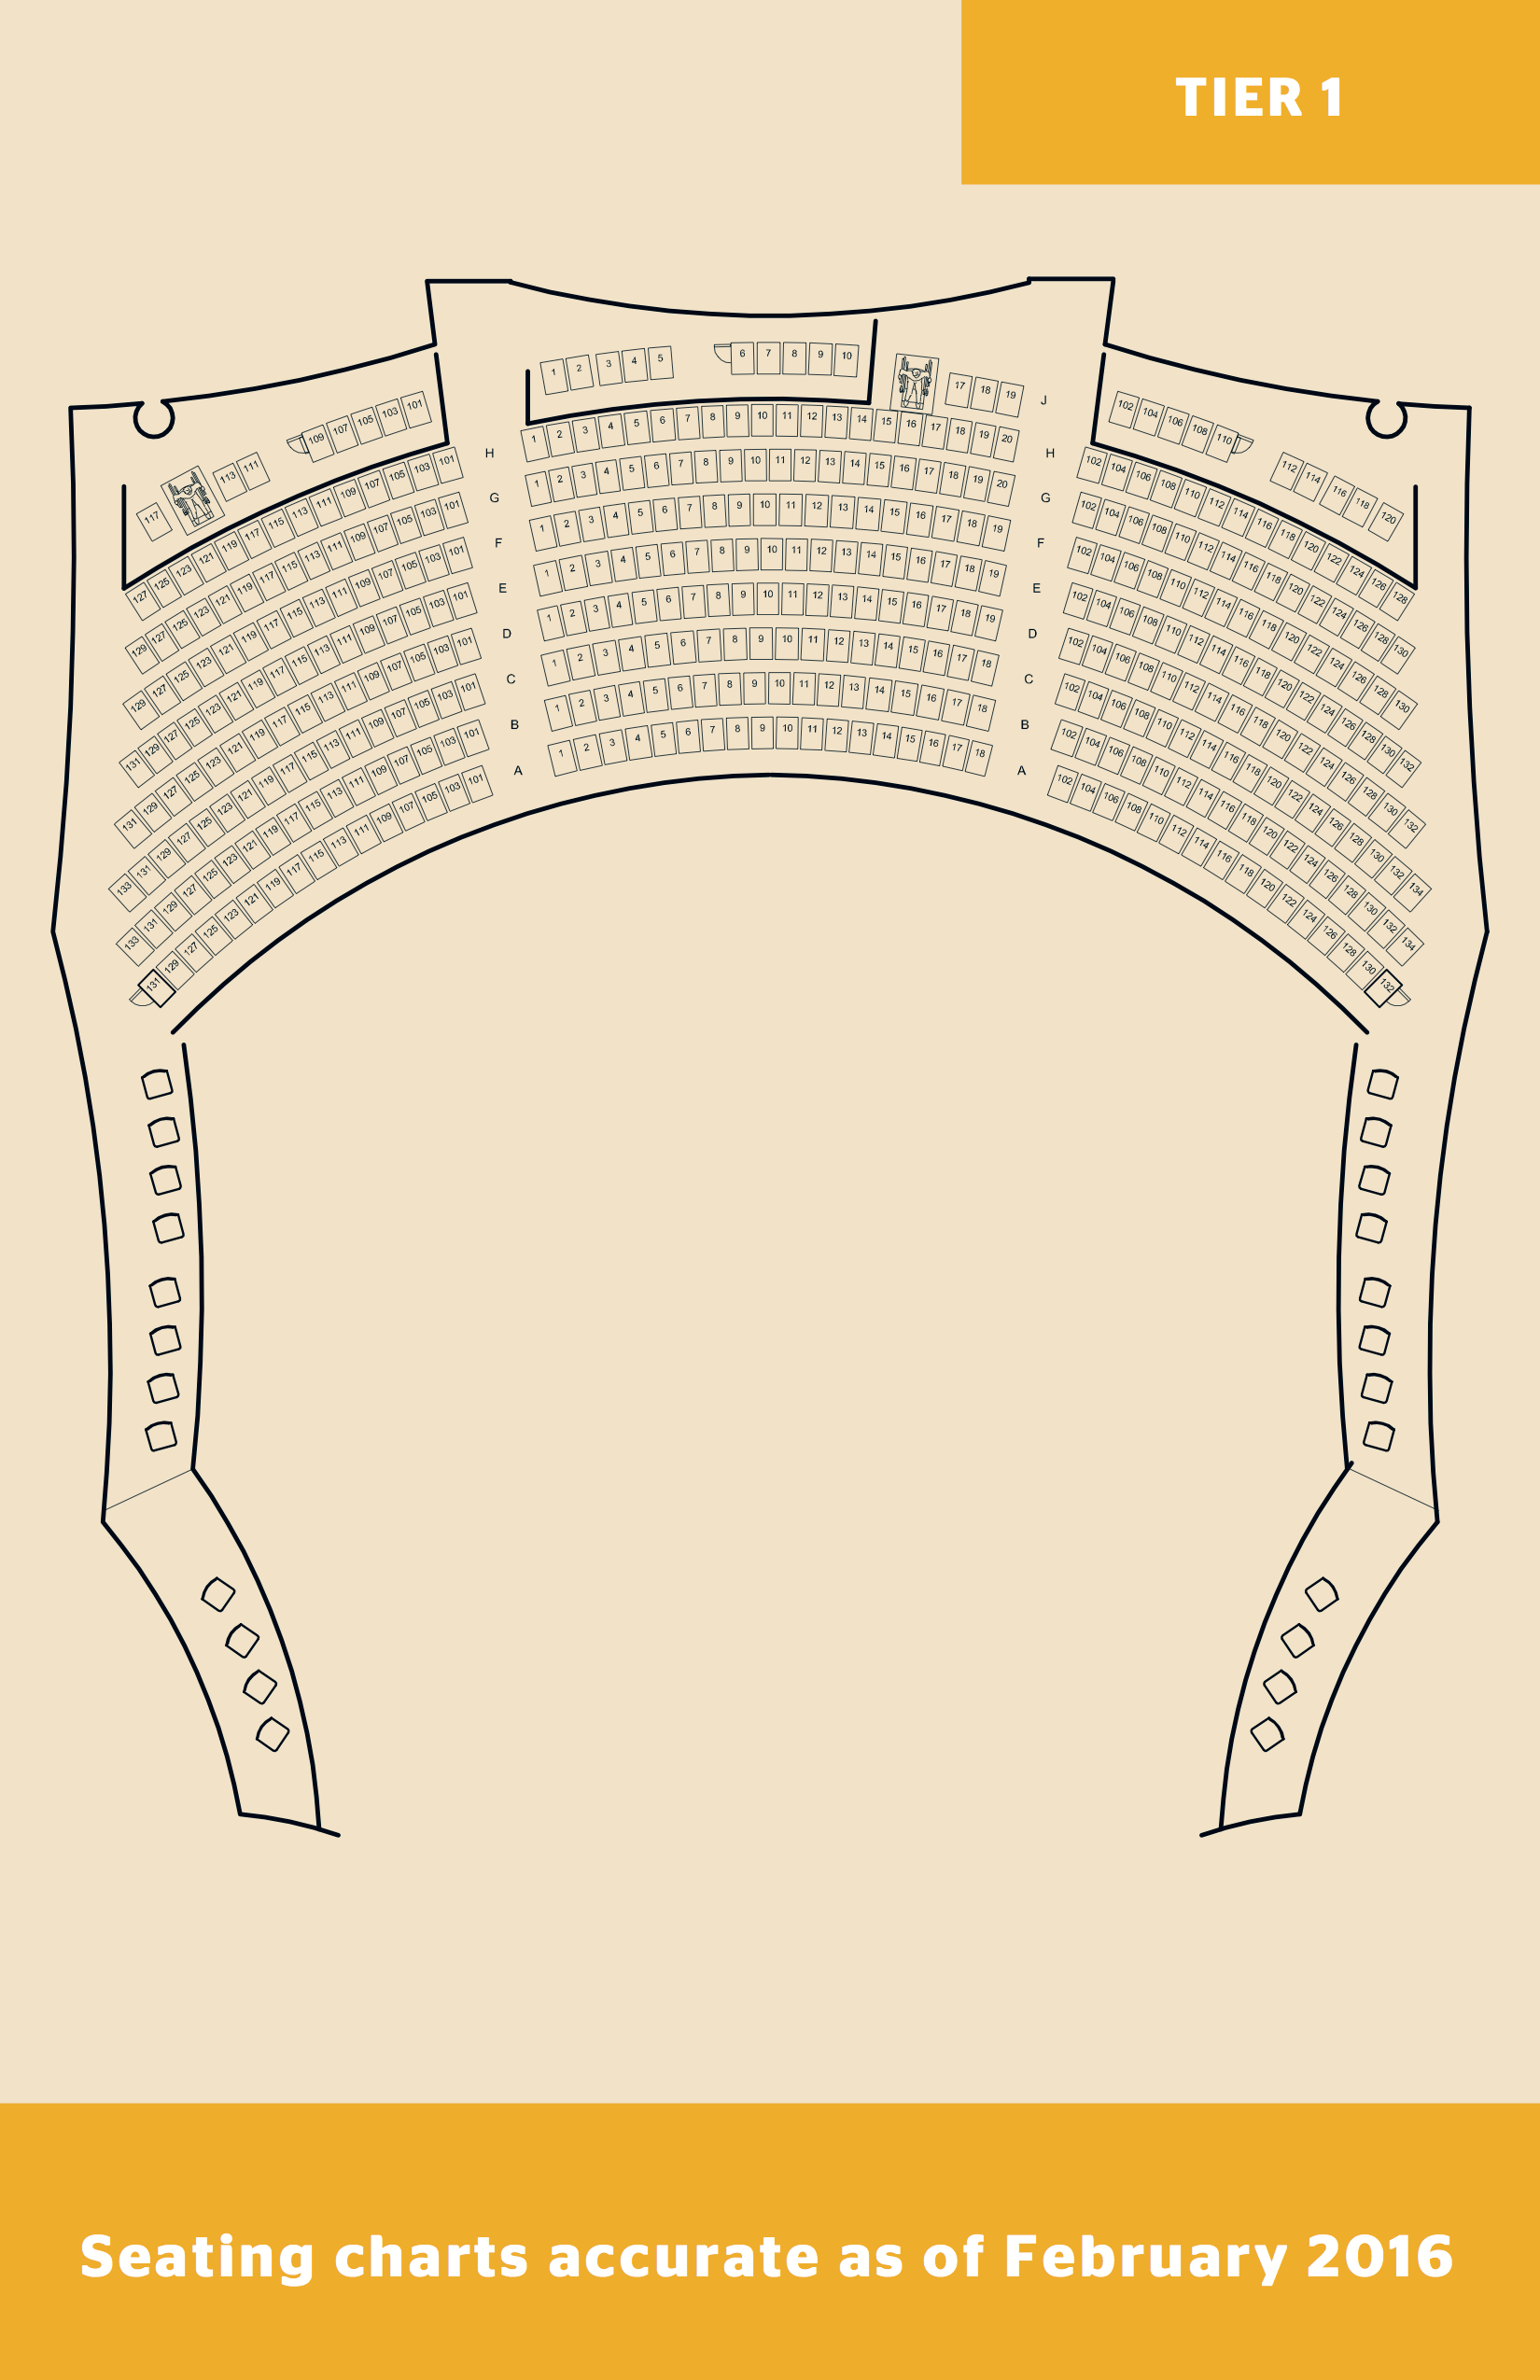 Seating Charts - Live at the Eccles